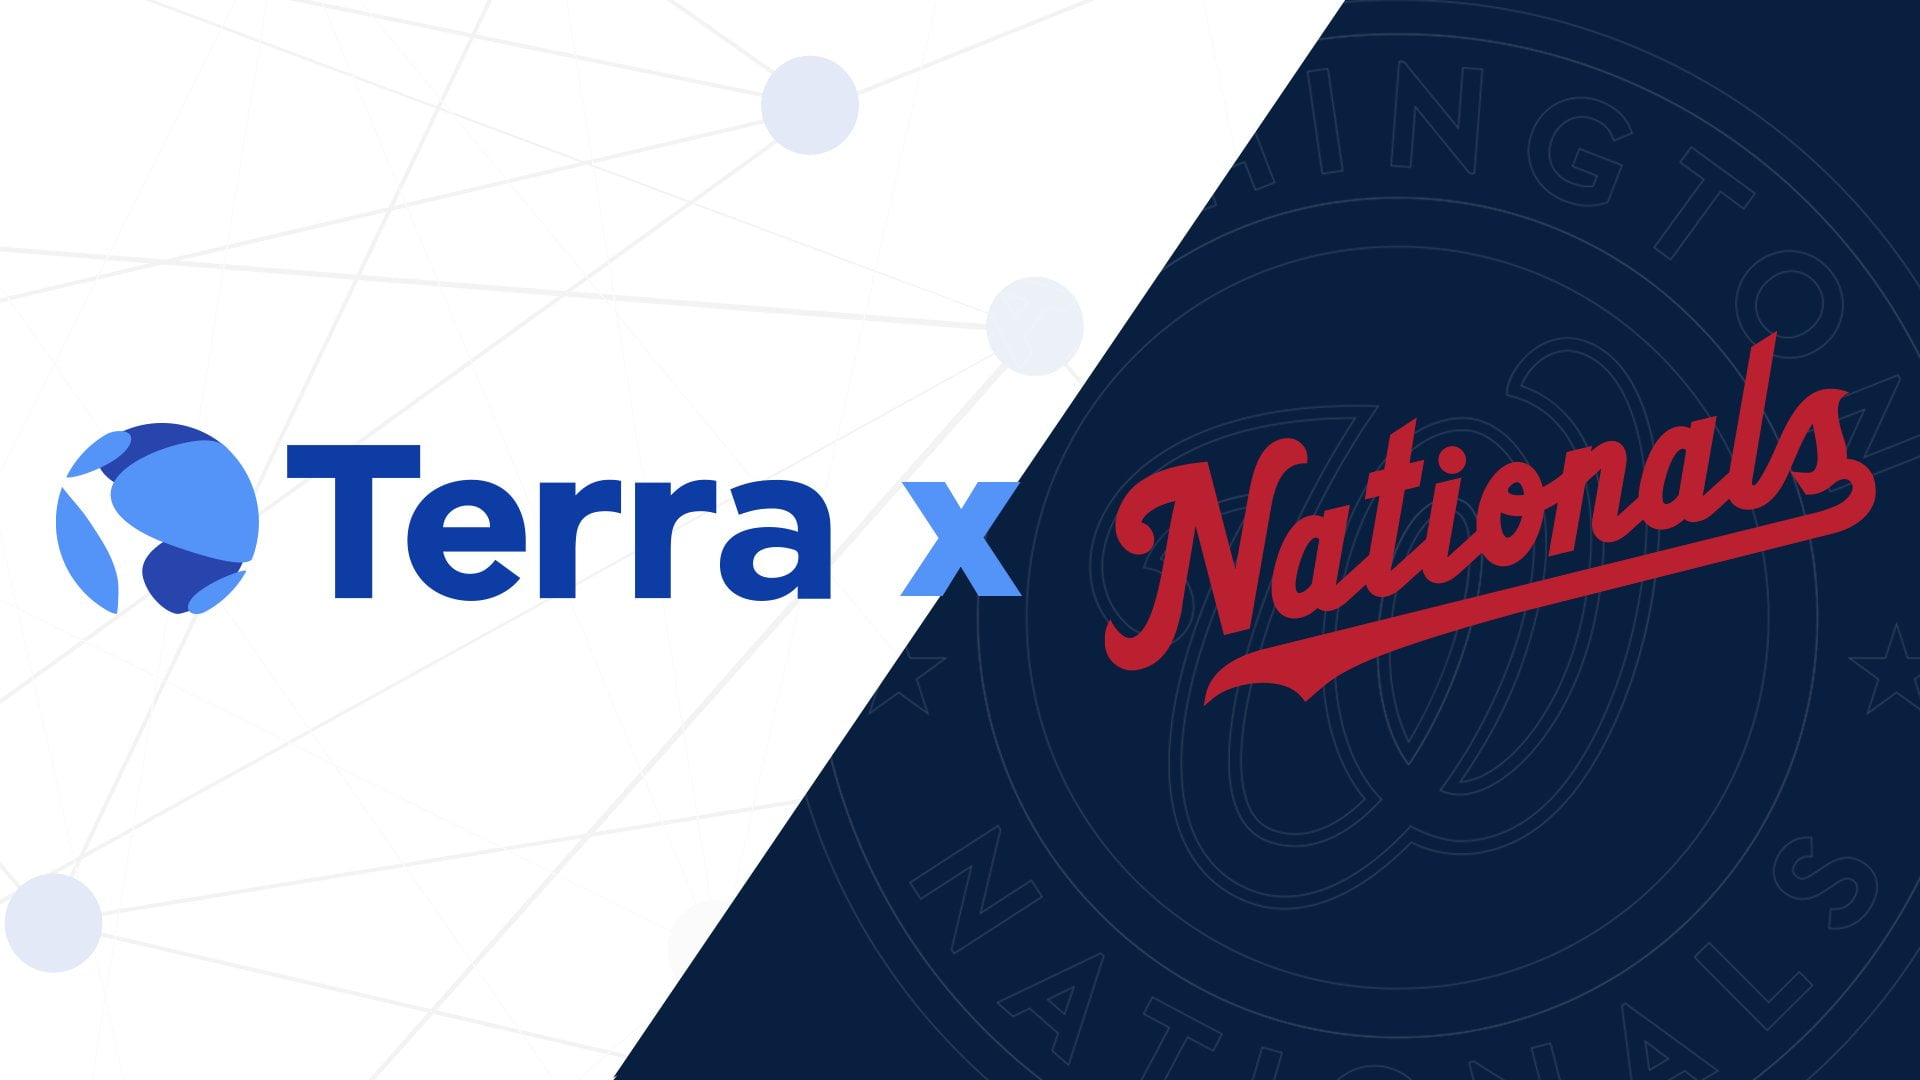 Terra becomes the official sponsor of the Washington Nationals baseball team